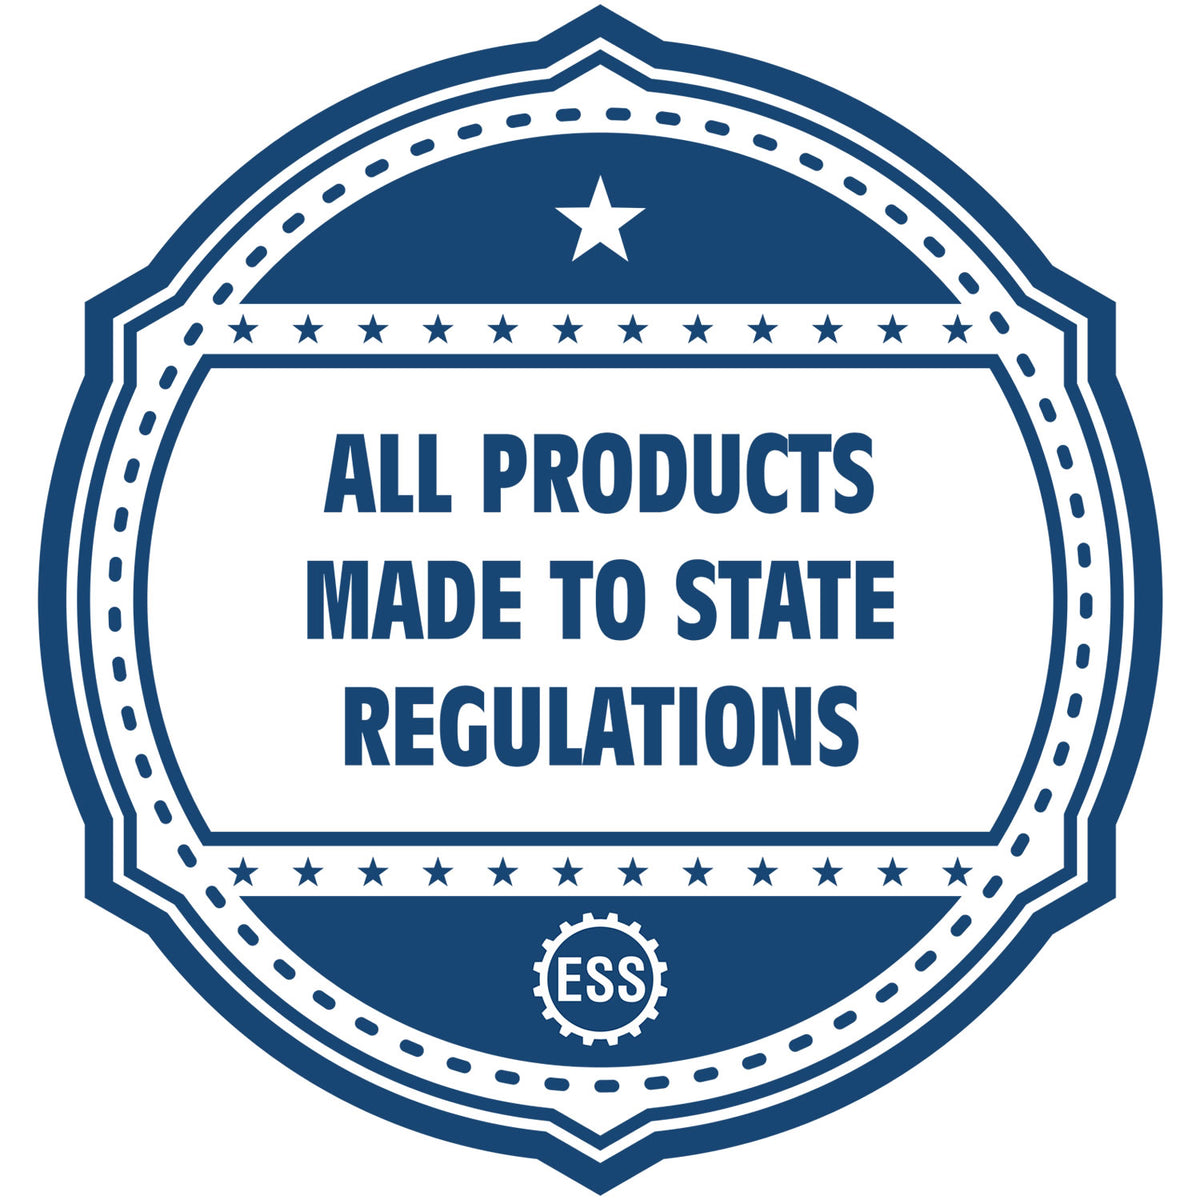 A blue icon or badge for the Gift Tennessee Landscape Architect Seal showing that this product is made in compliance with state regulations.